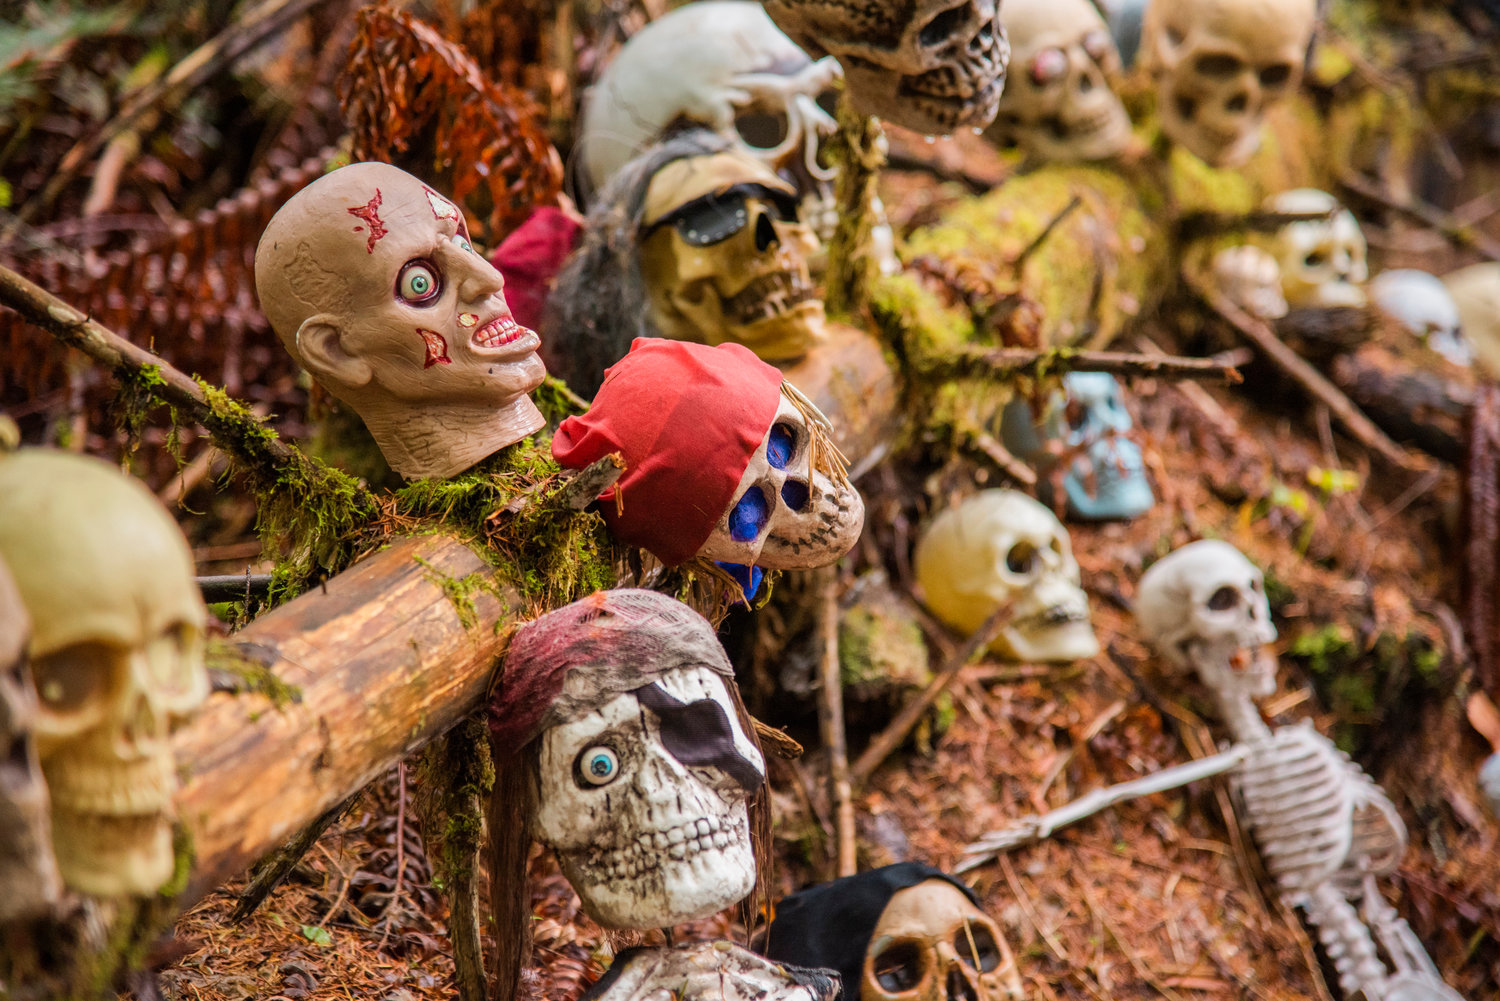 Skulls and ghouls decorate the haunted forest at The Huntting’s Farm in Cinebar Wednesday afternoon.